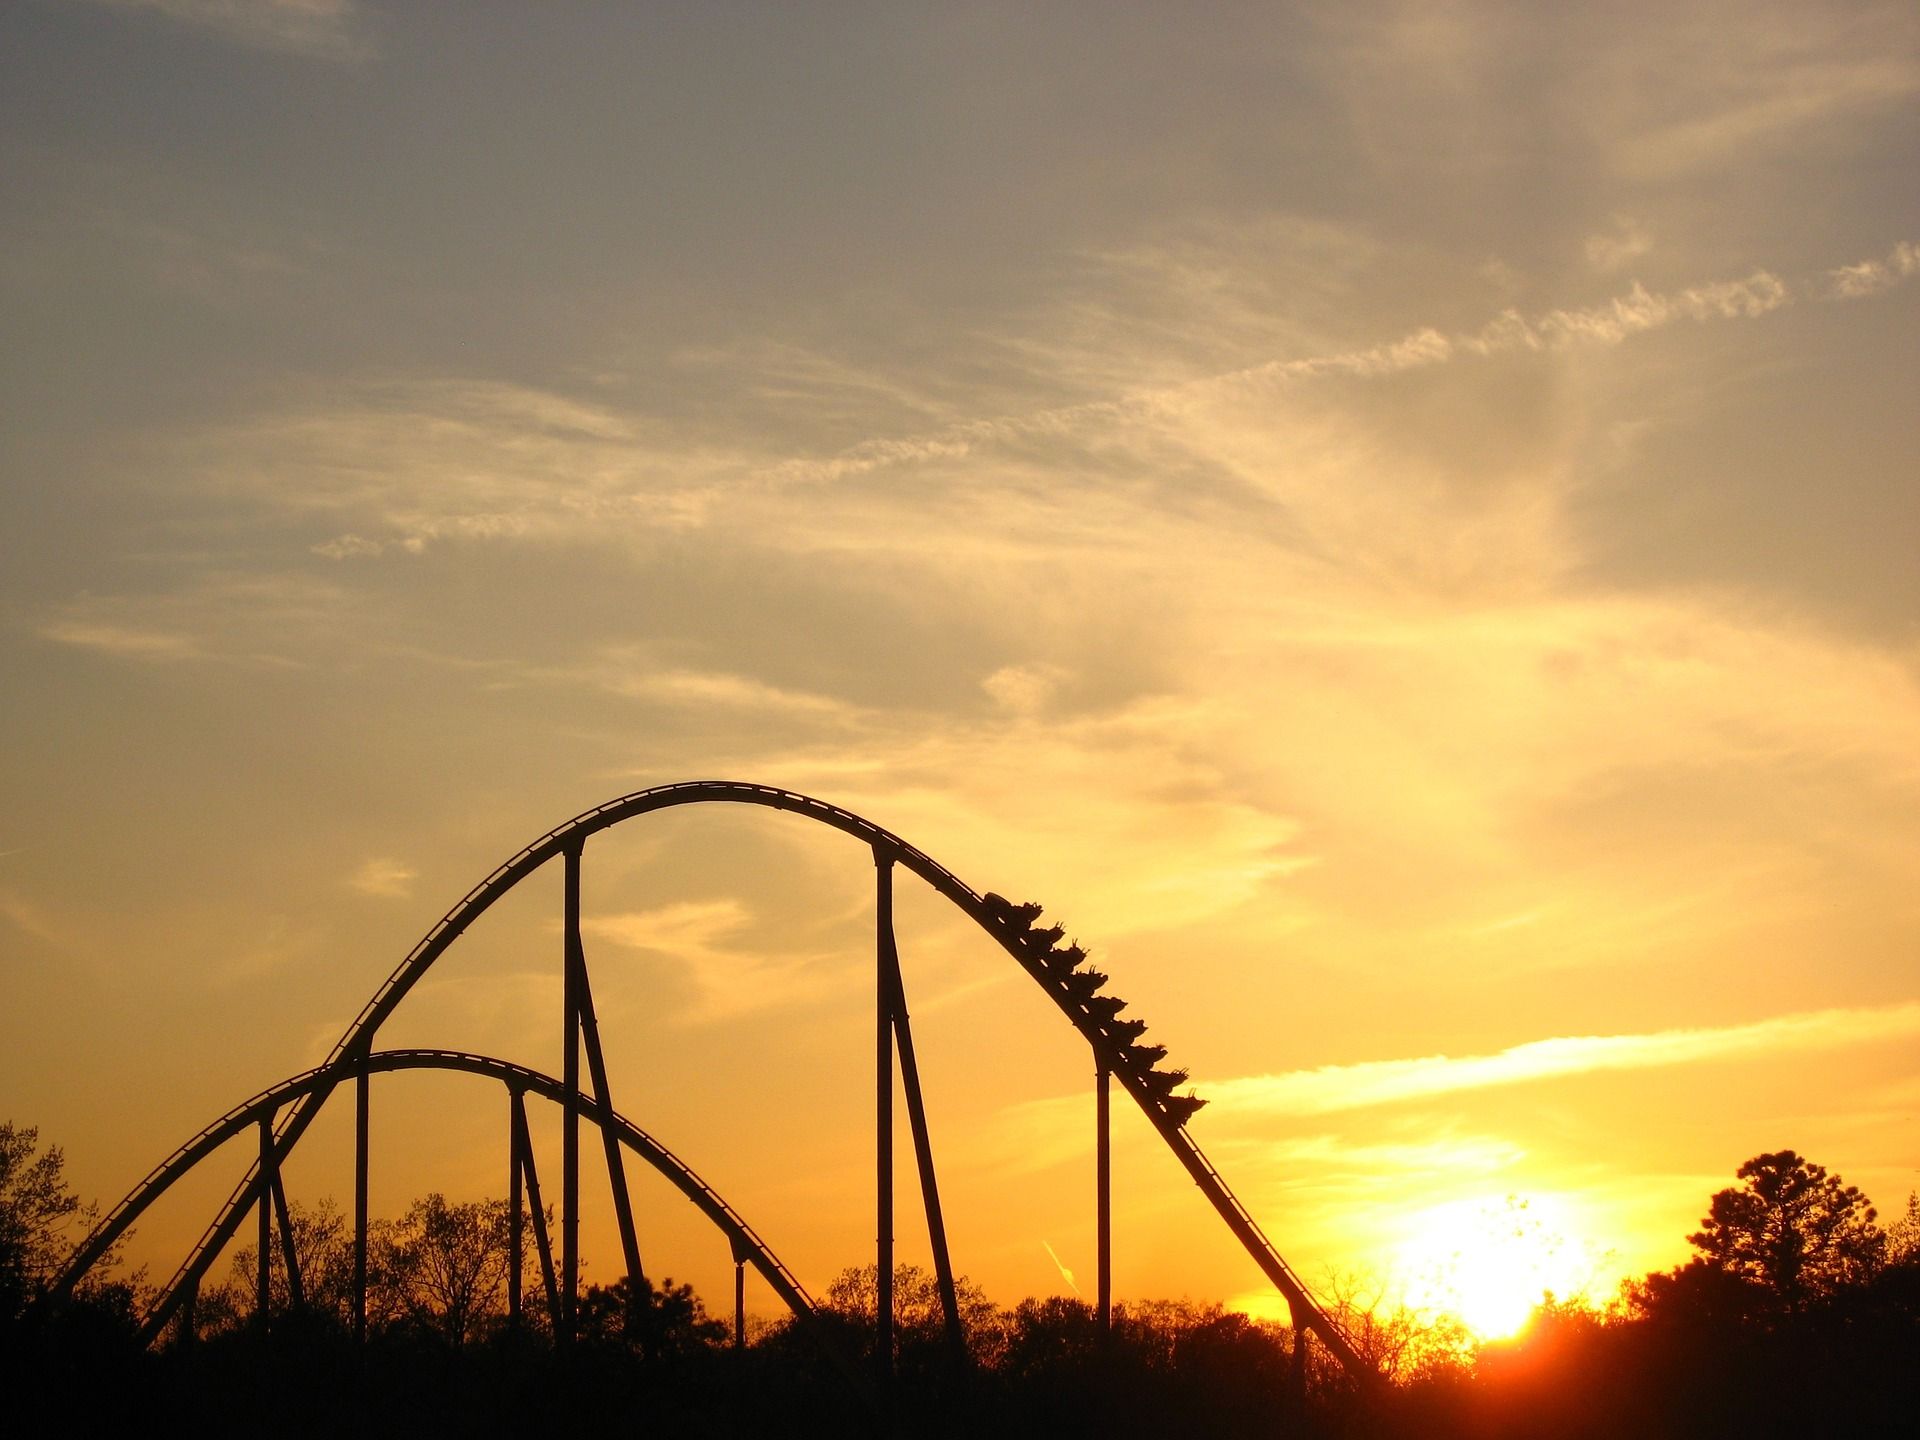 Sunset with a silhouette of a rollercoaster.